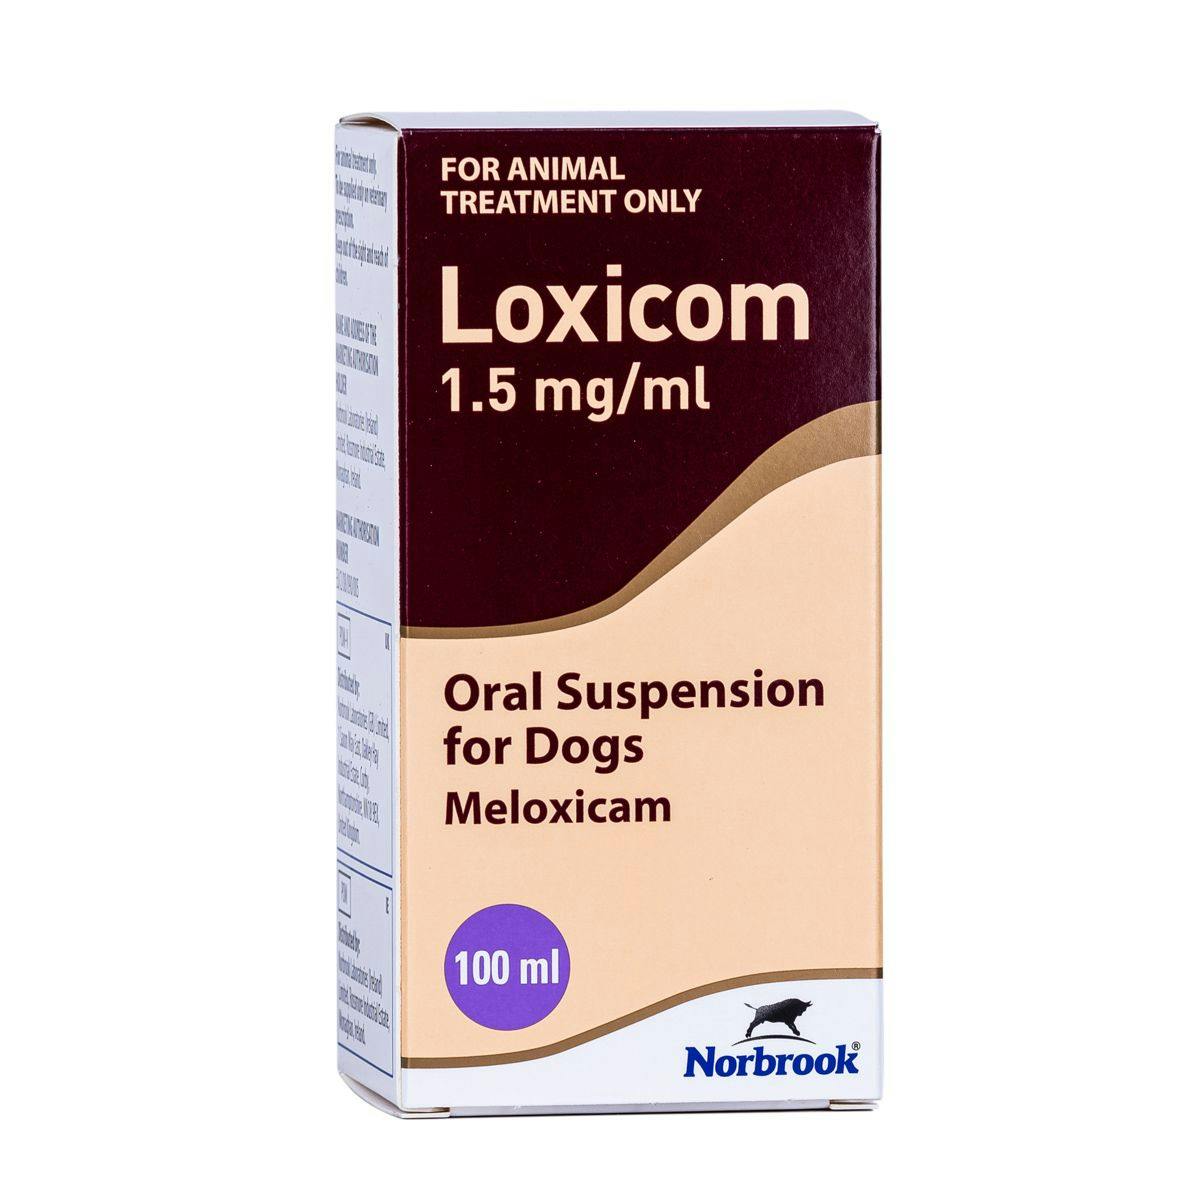 Loxicom for Dogs (Meloxicam) - 1.5mg/ml Oral Suspension